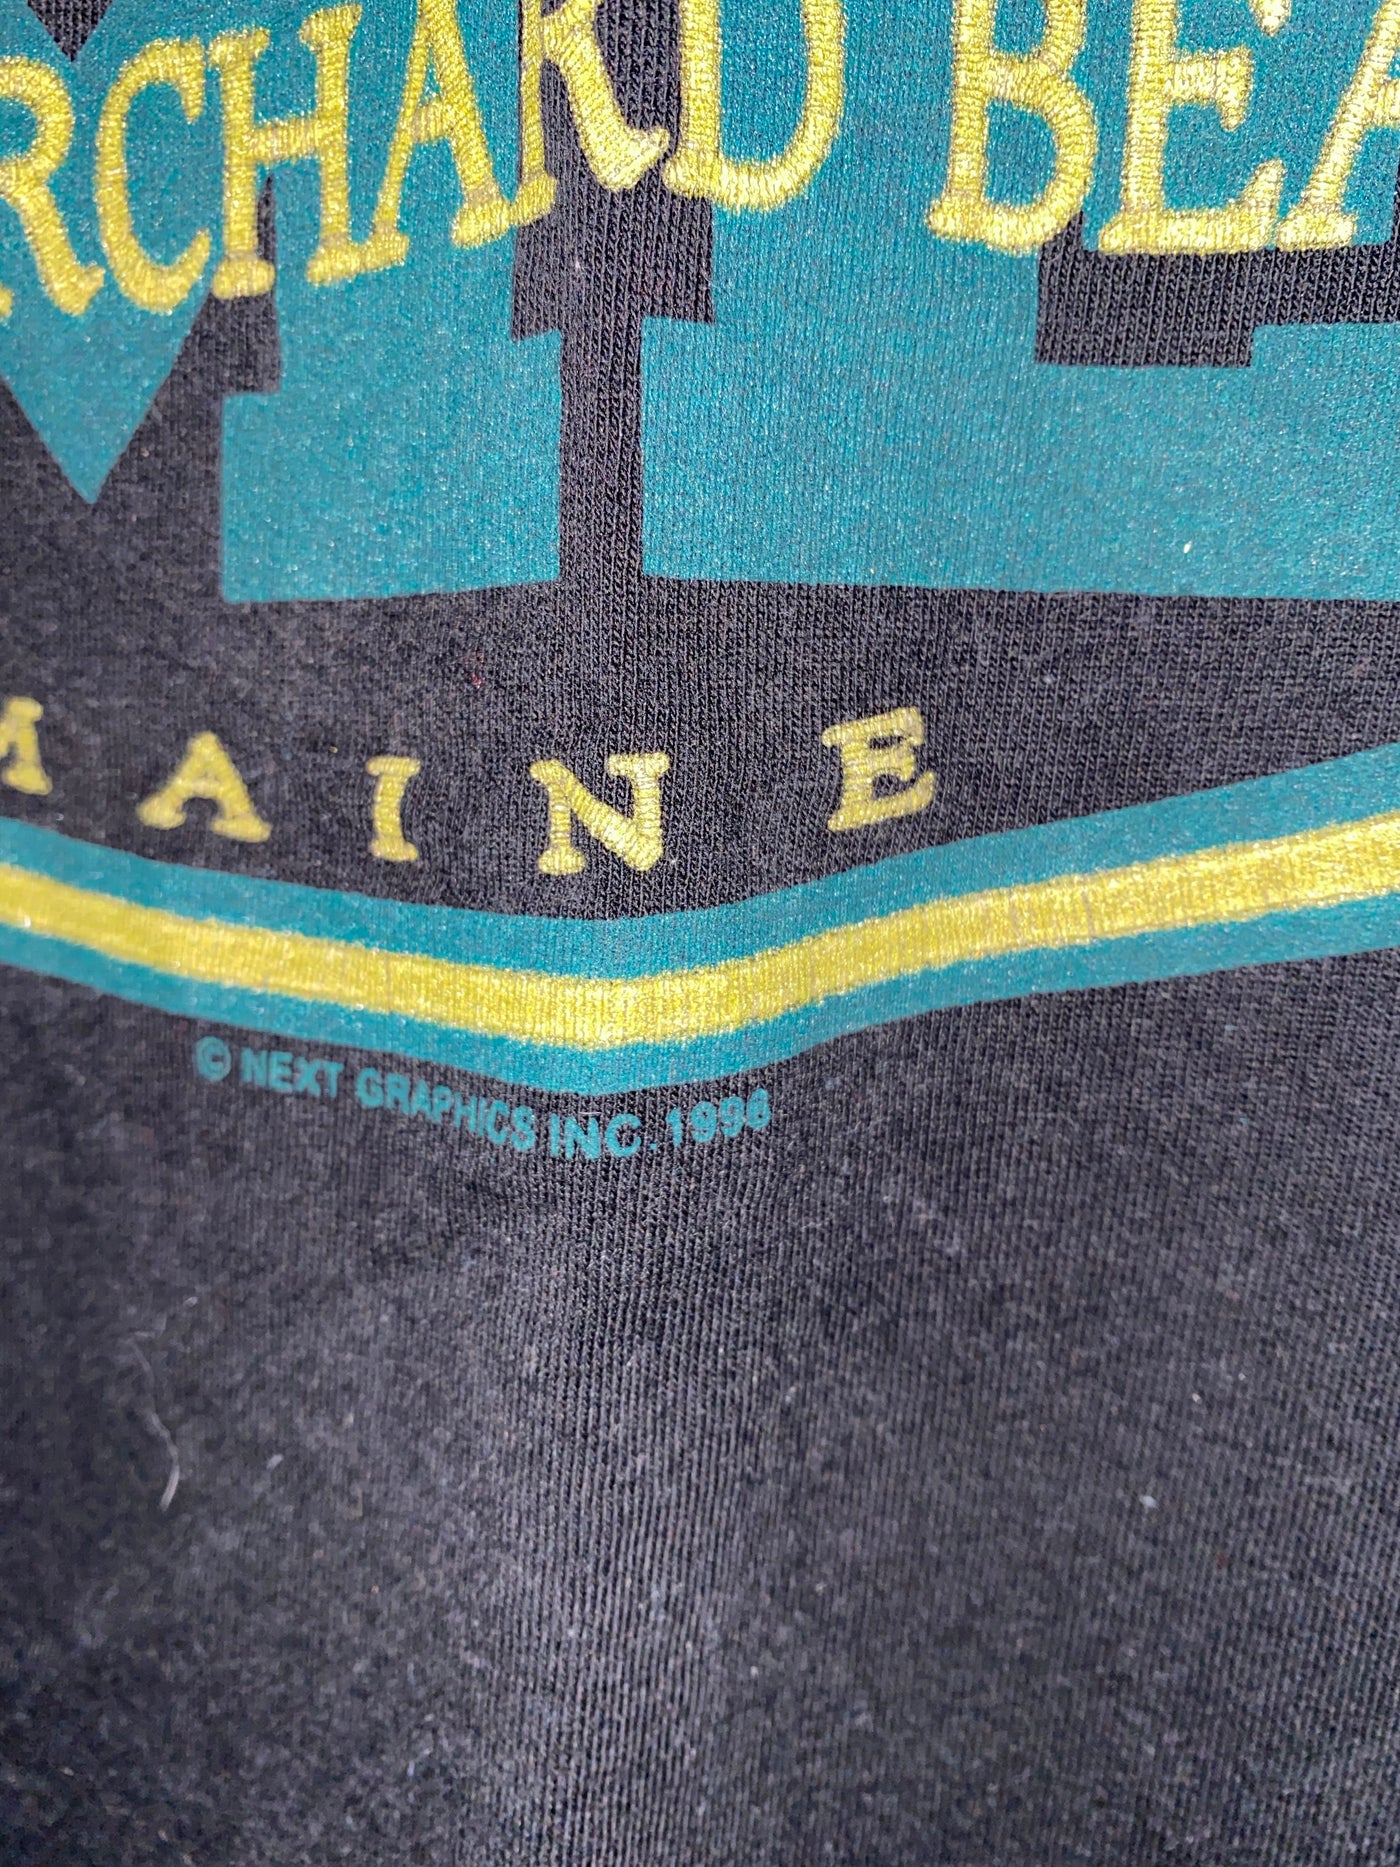 Vintage 1996 Old Orchard Maine T-Shirt